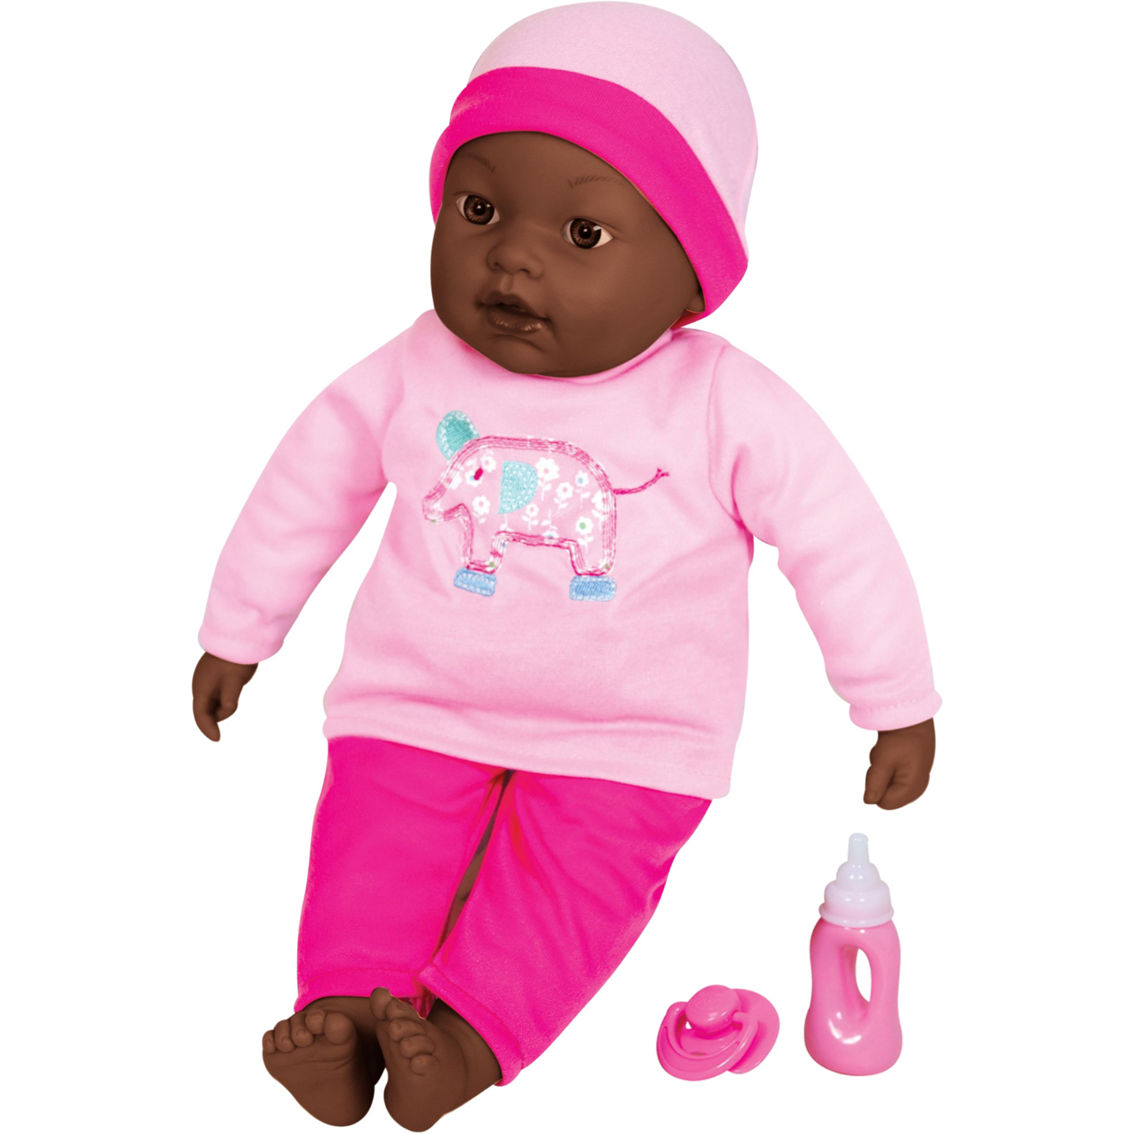 Lissi Baby Beatrice 16 in. Interactive Black Hair Baby Doll with 7 Functions - Image 2 of 3